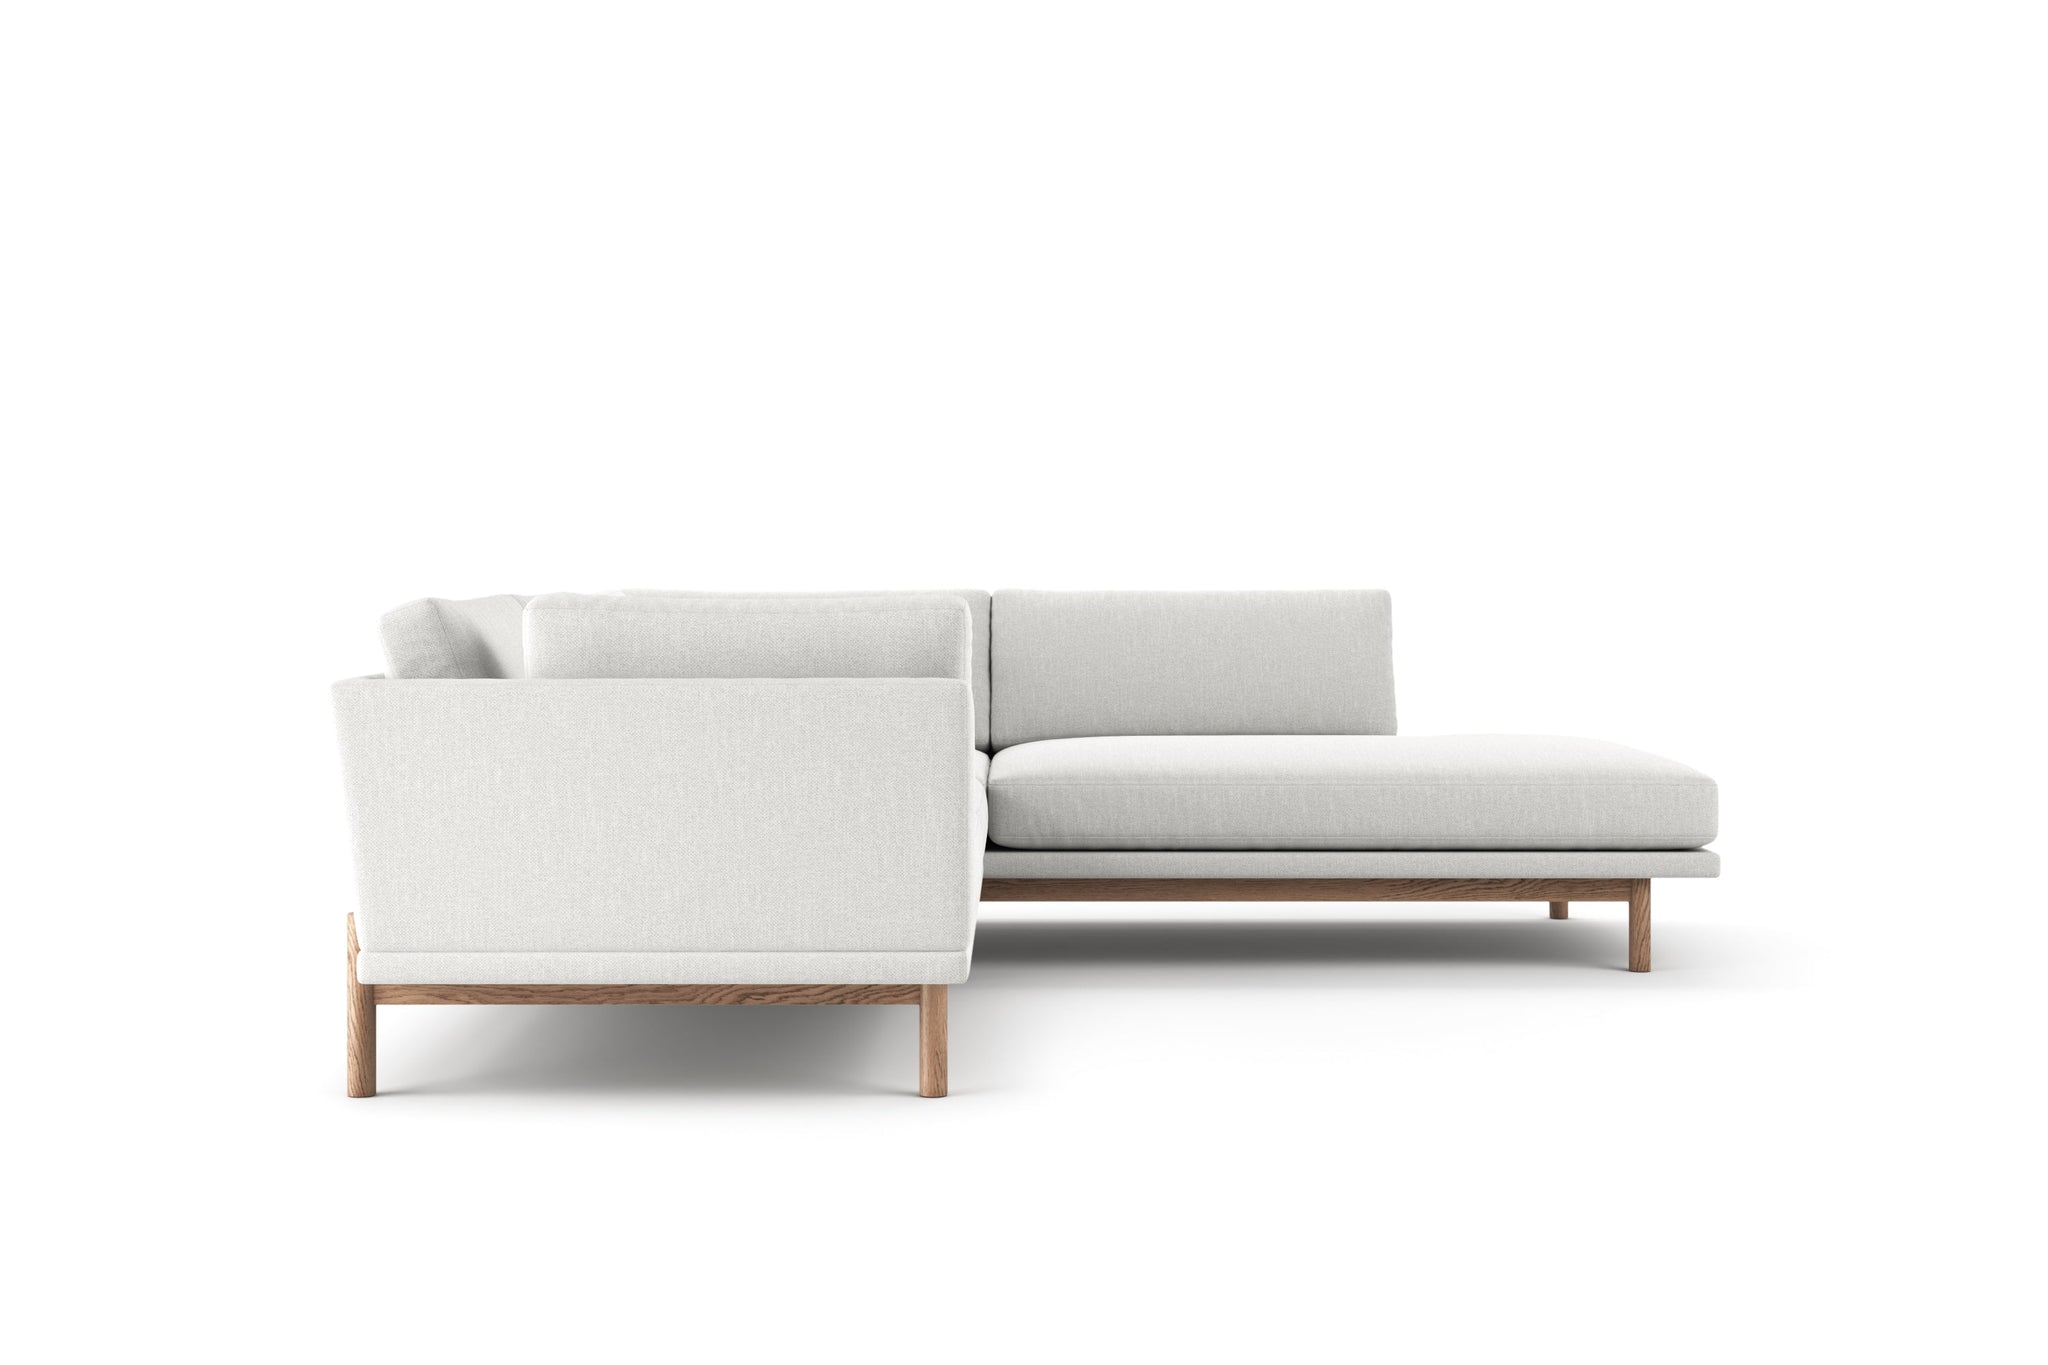 O'side Sectional with Bumper